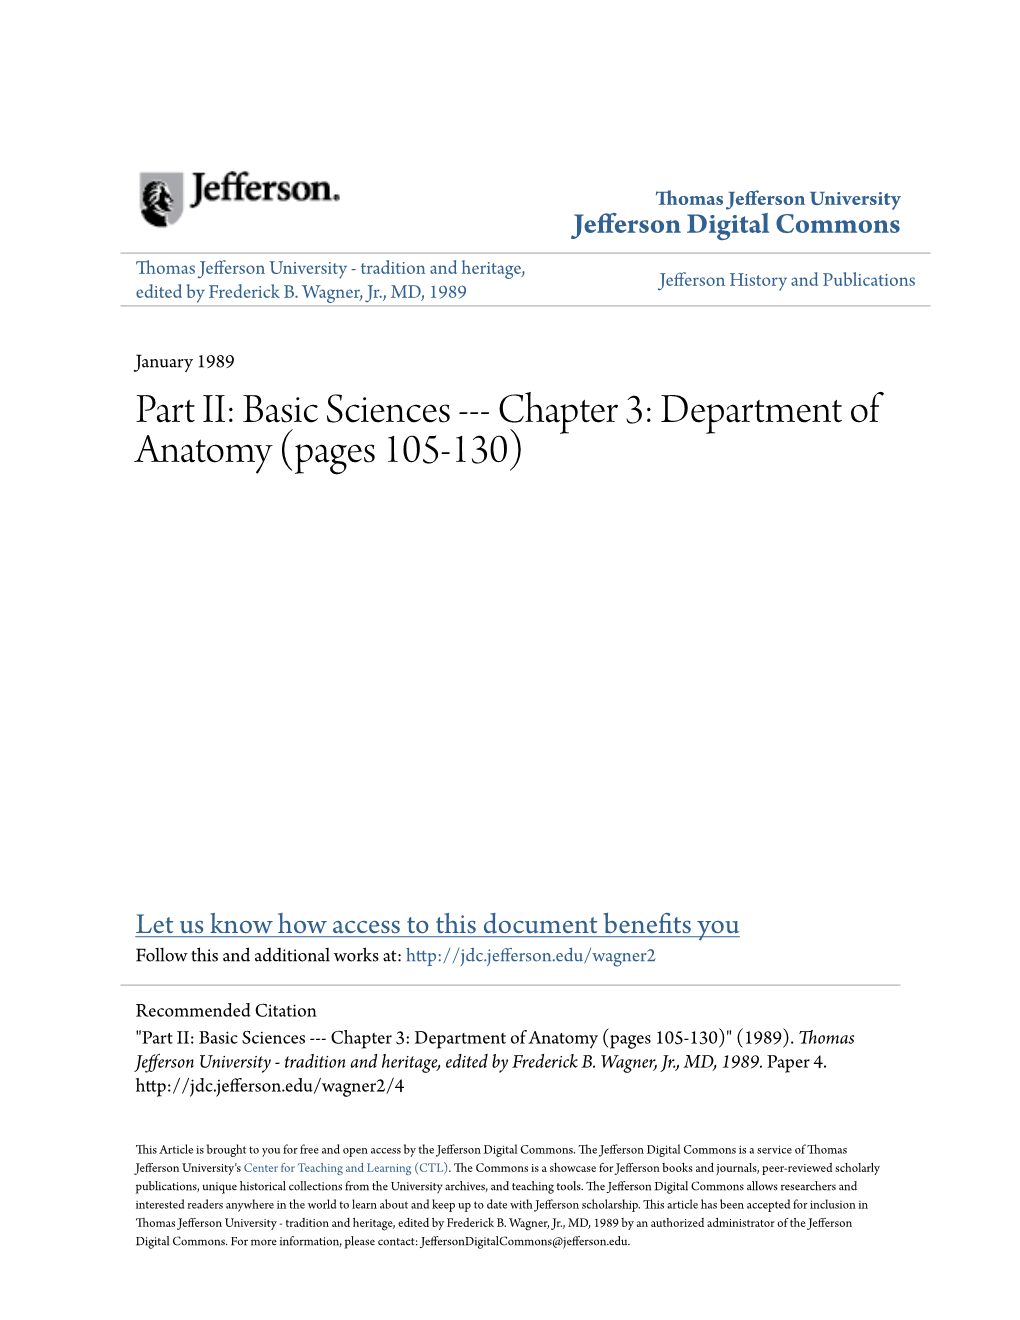 Department of Anatomy (Pages 105-130)